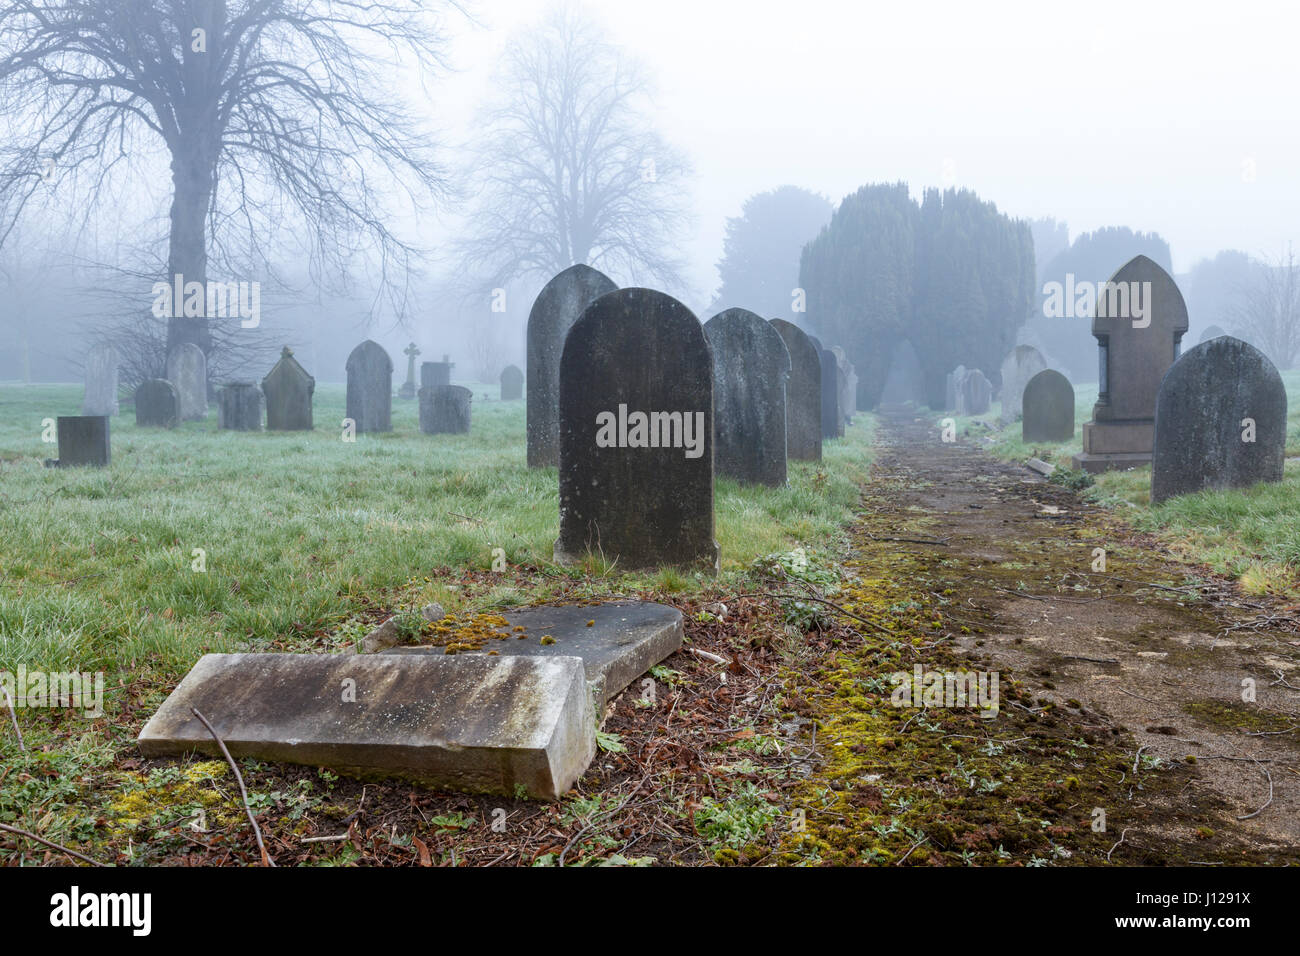 Fallen gravestone and other headstones on a misty day at a cemetery, England, UK Stock Photo